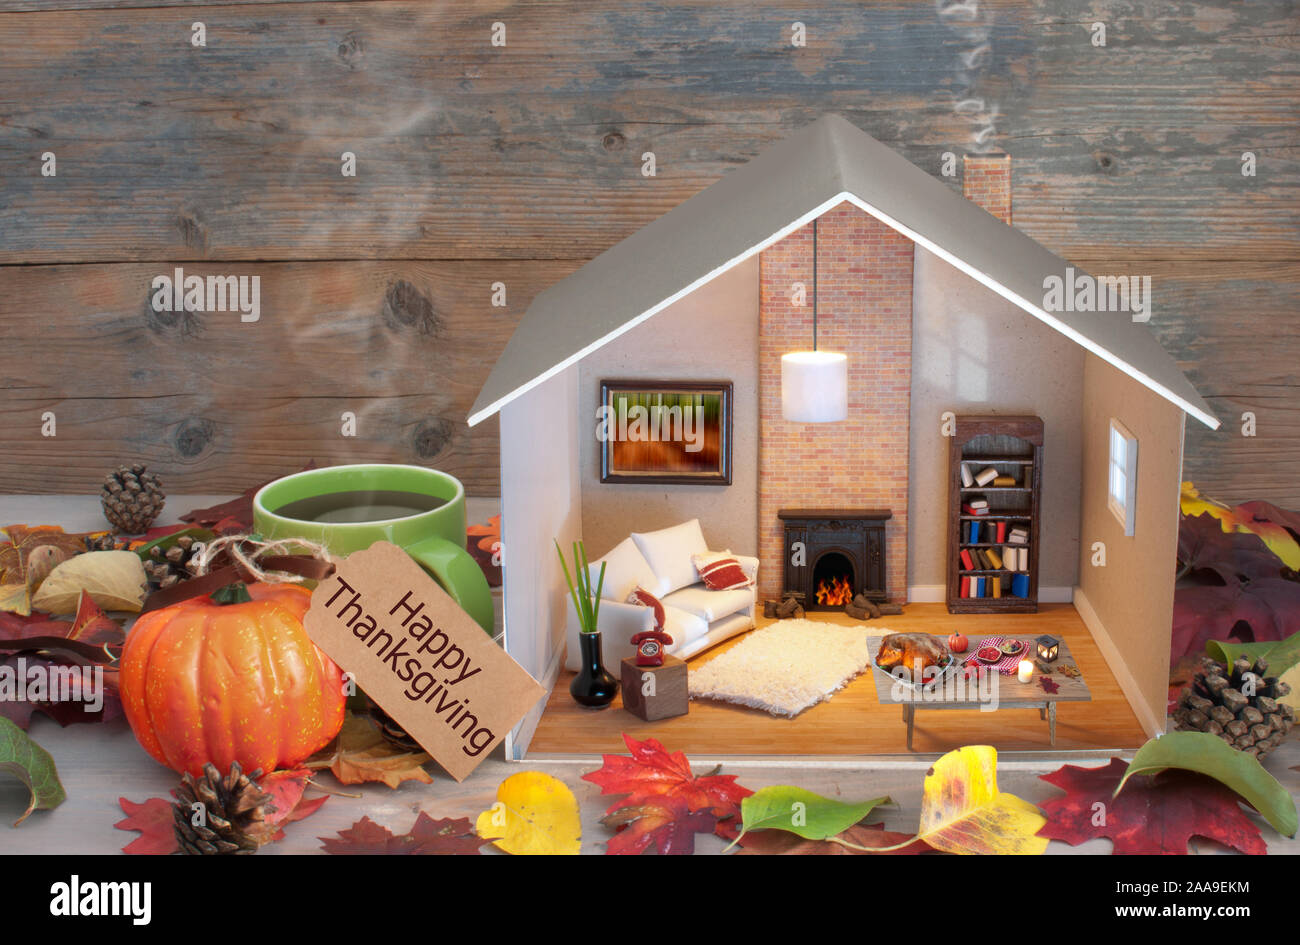 Thanksgiving home scene with label attached to miniature house living room and fireplace, and seasonal food laid out on a table Stock Photo